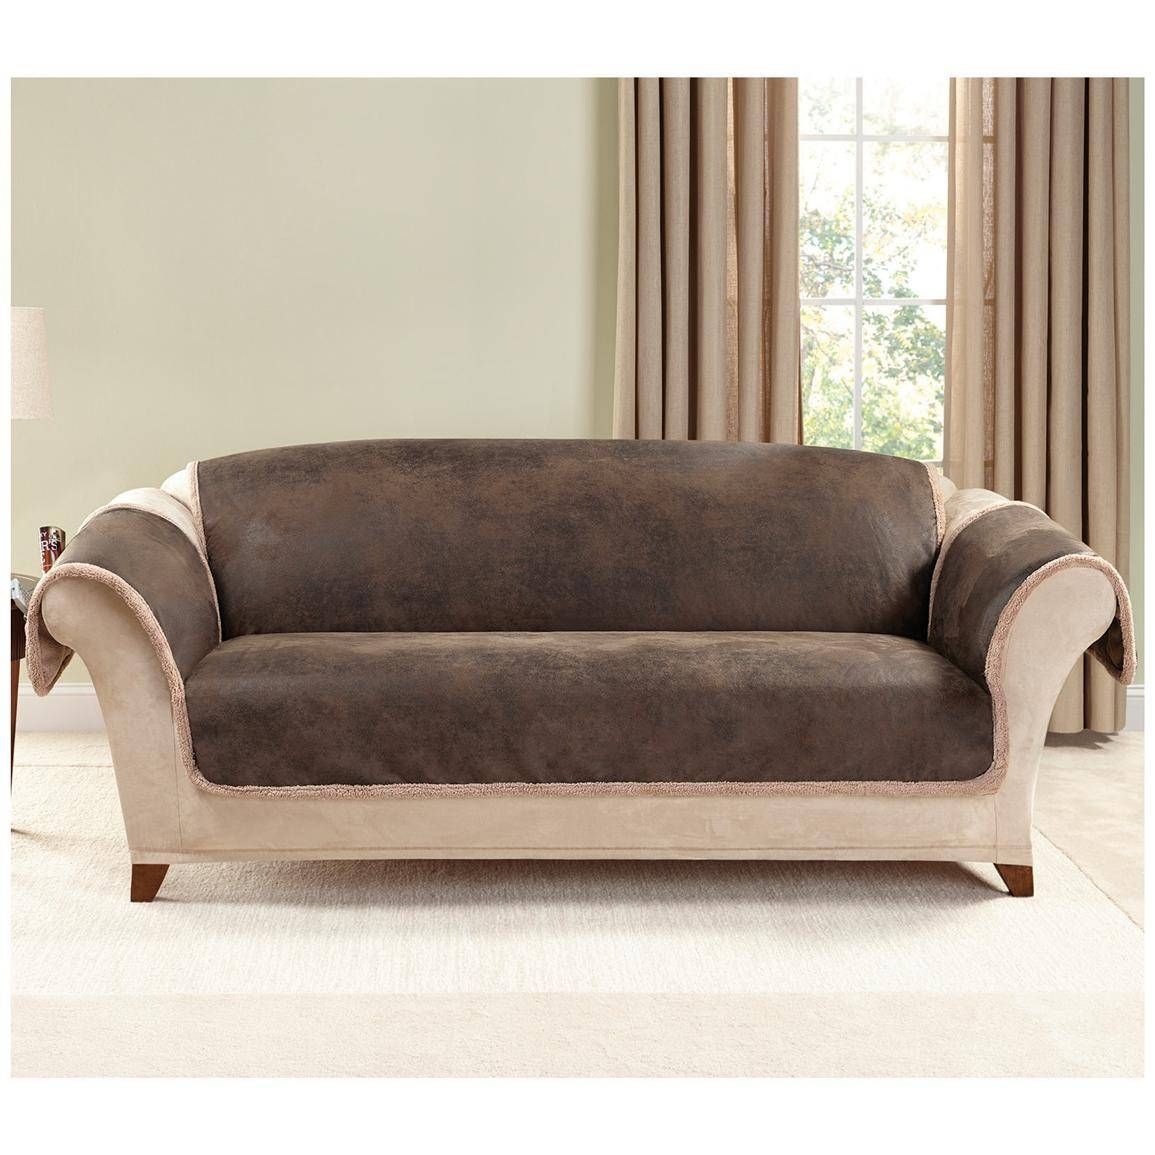 Sure Fit® Leather Furn Friend Sofa Slipcover – 581243, Furniture With Regard To Slipcover For Leather Sofas (Photo 5 of 30)